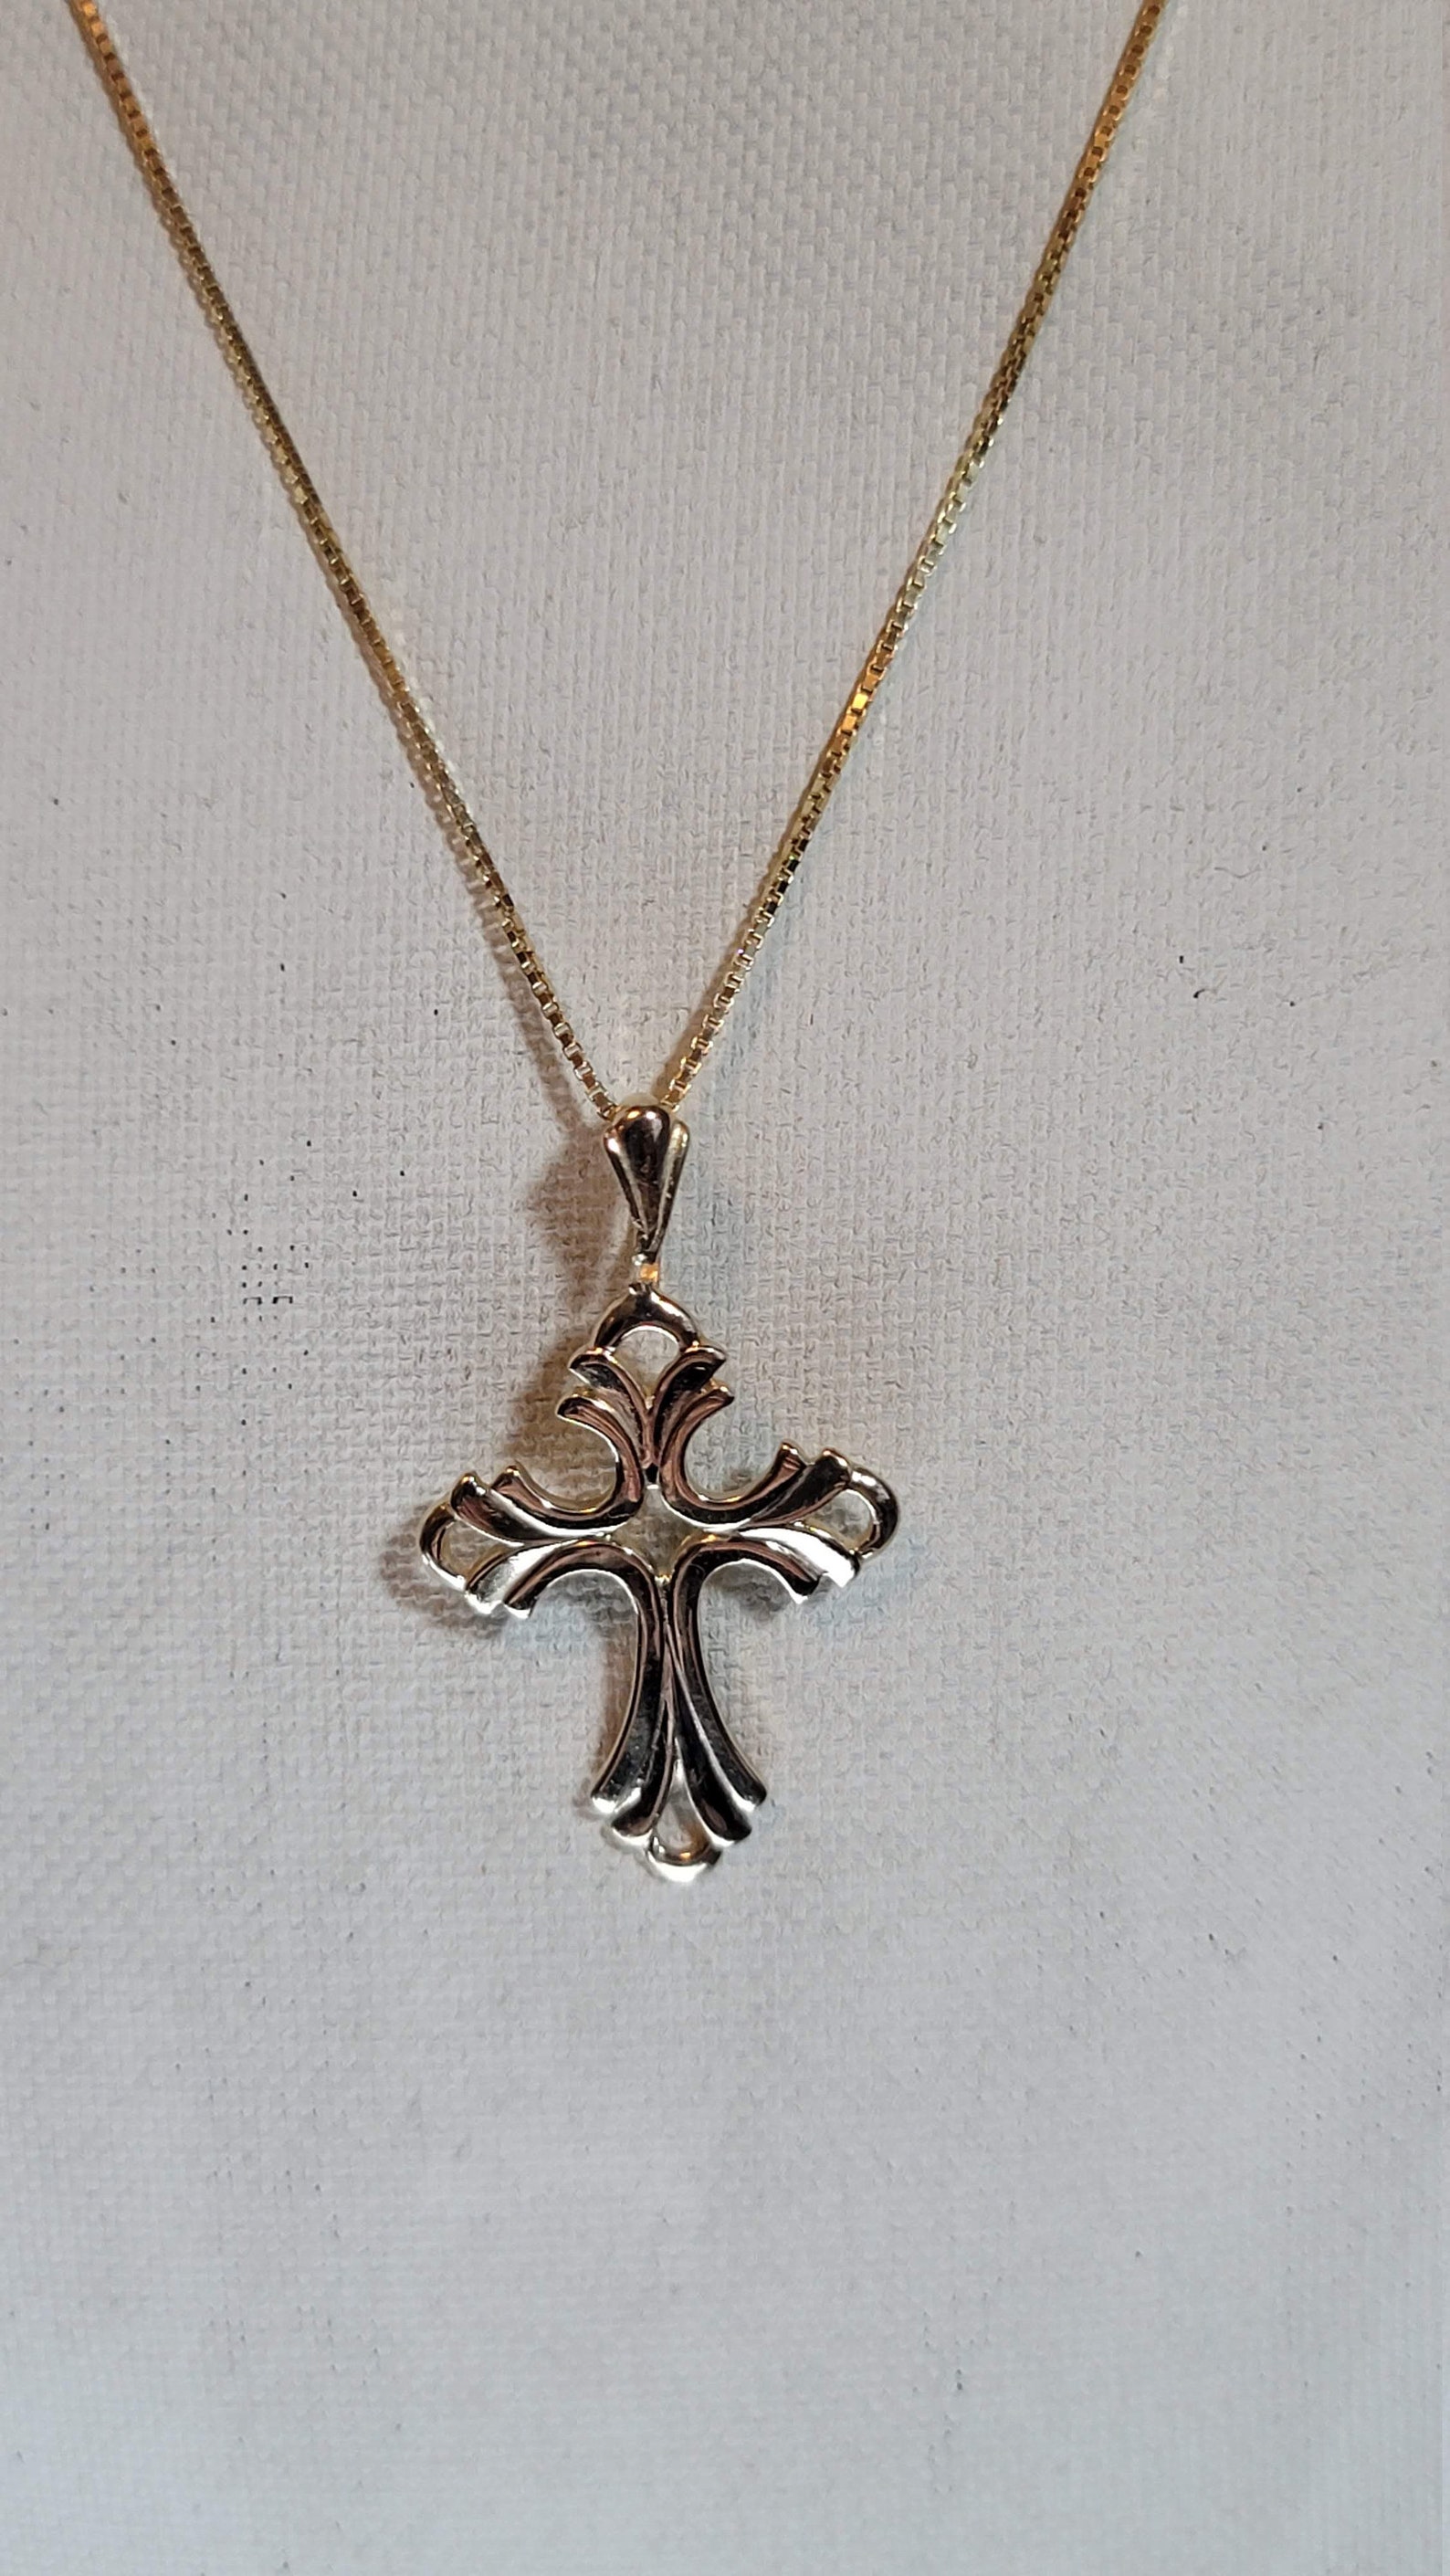 14kt Gold Cross Chain Necklace Vintage Jewelry Real Gold - Etsy